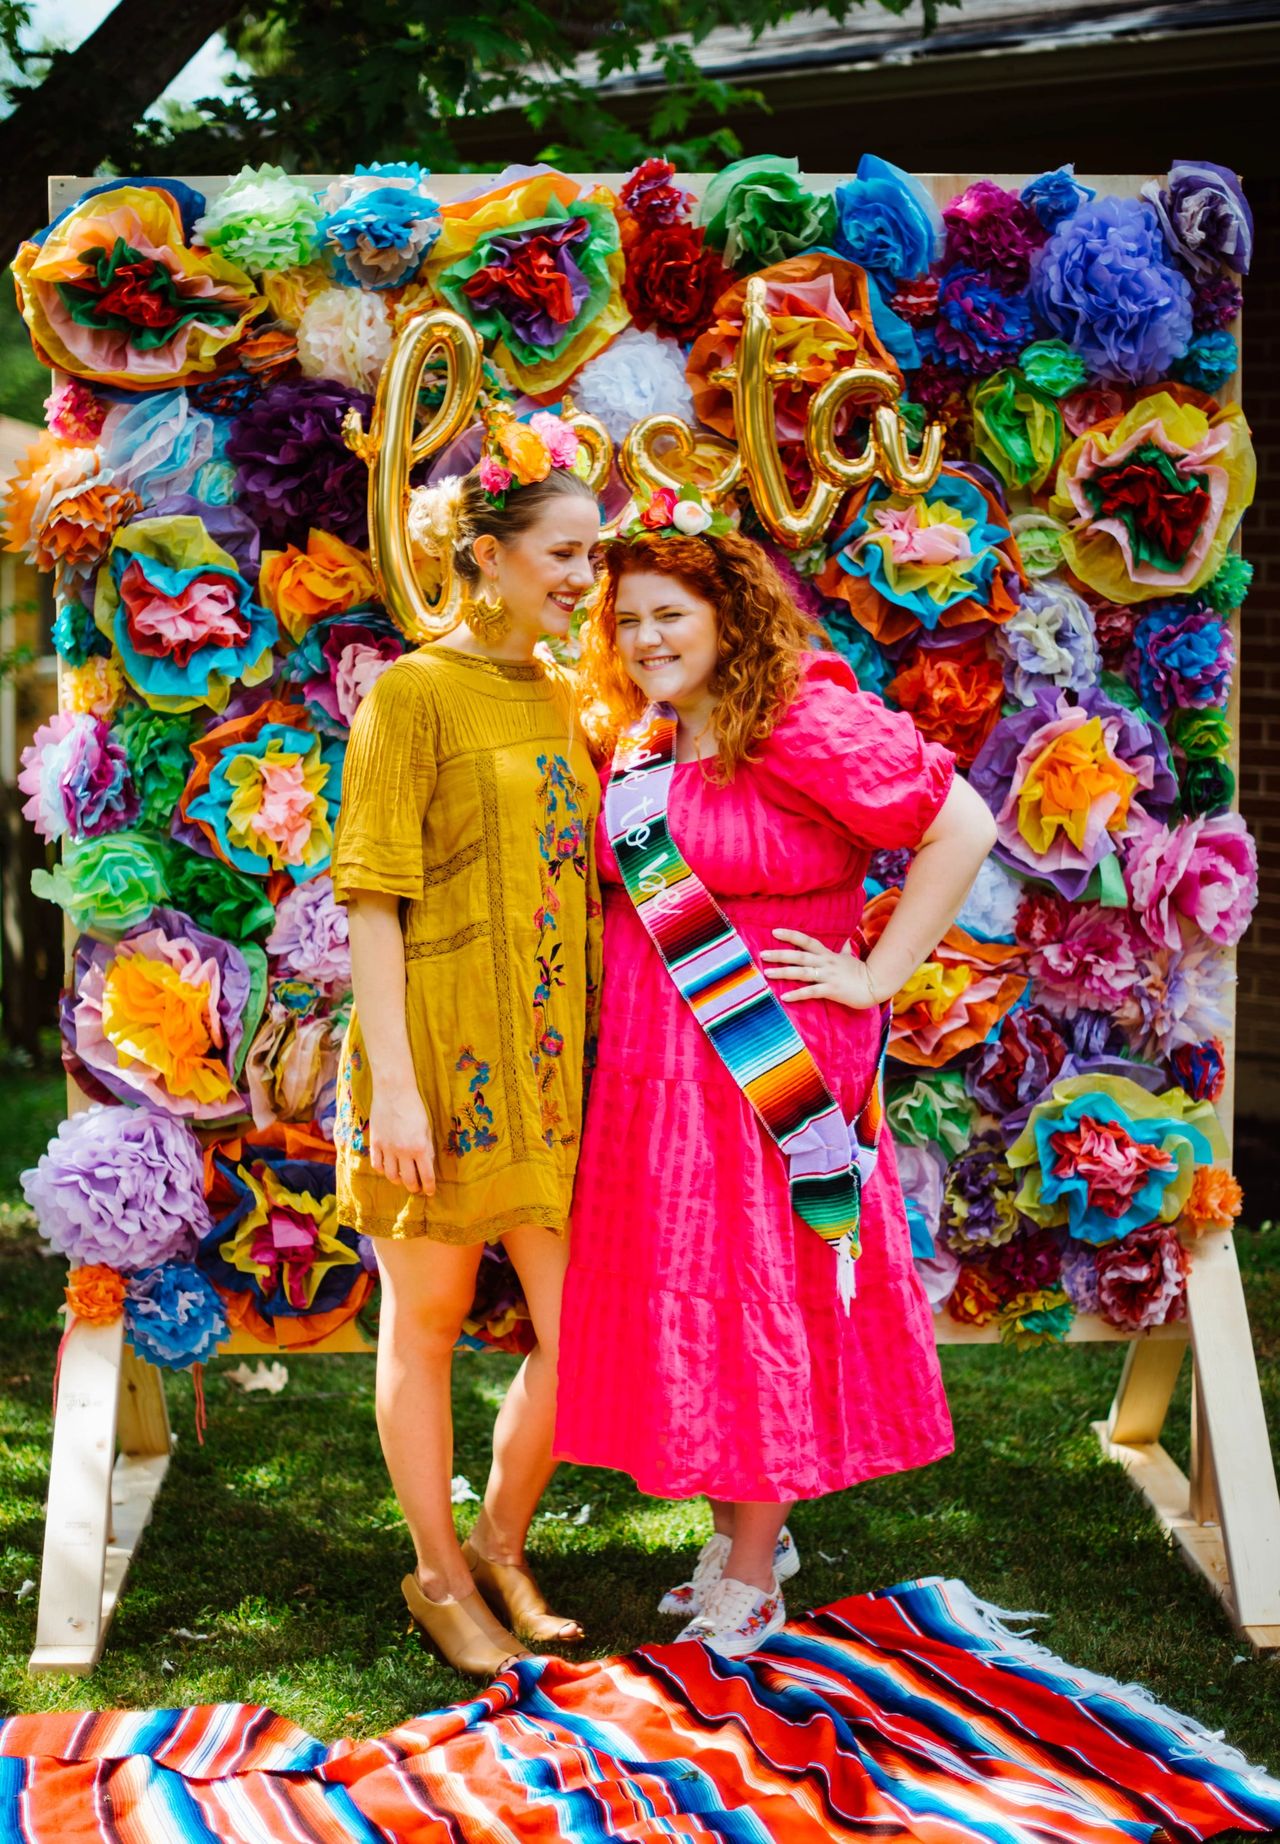 Two women dressed in bright colors in front of a fiesta photo backdrop.